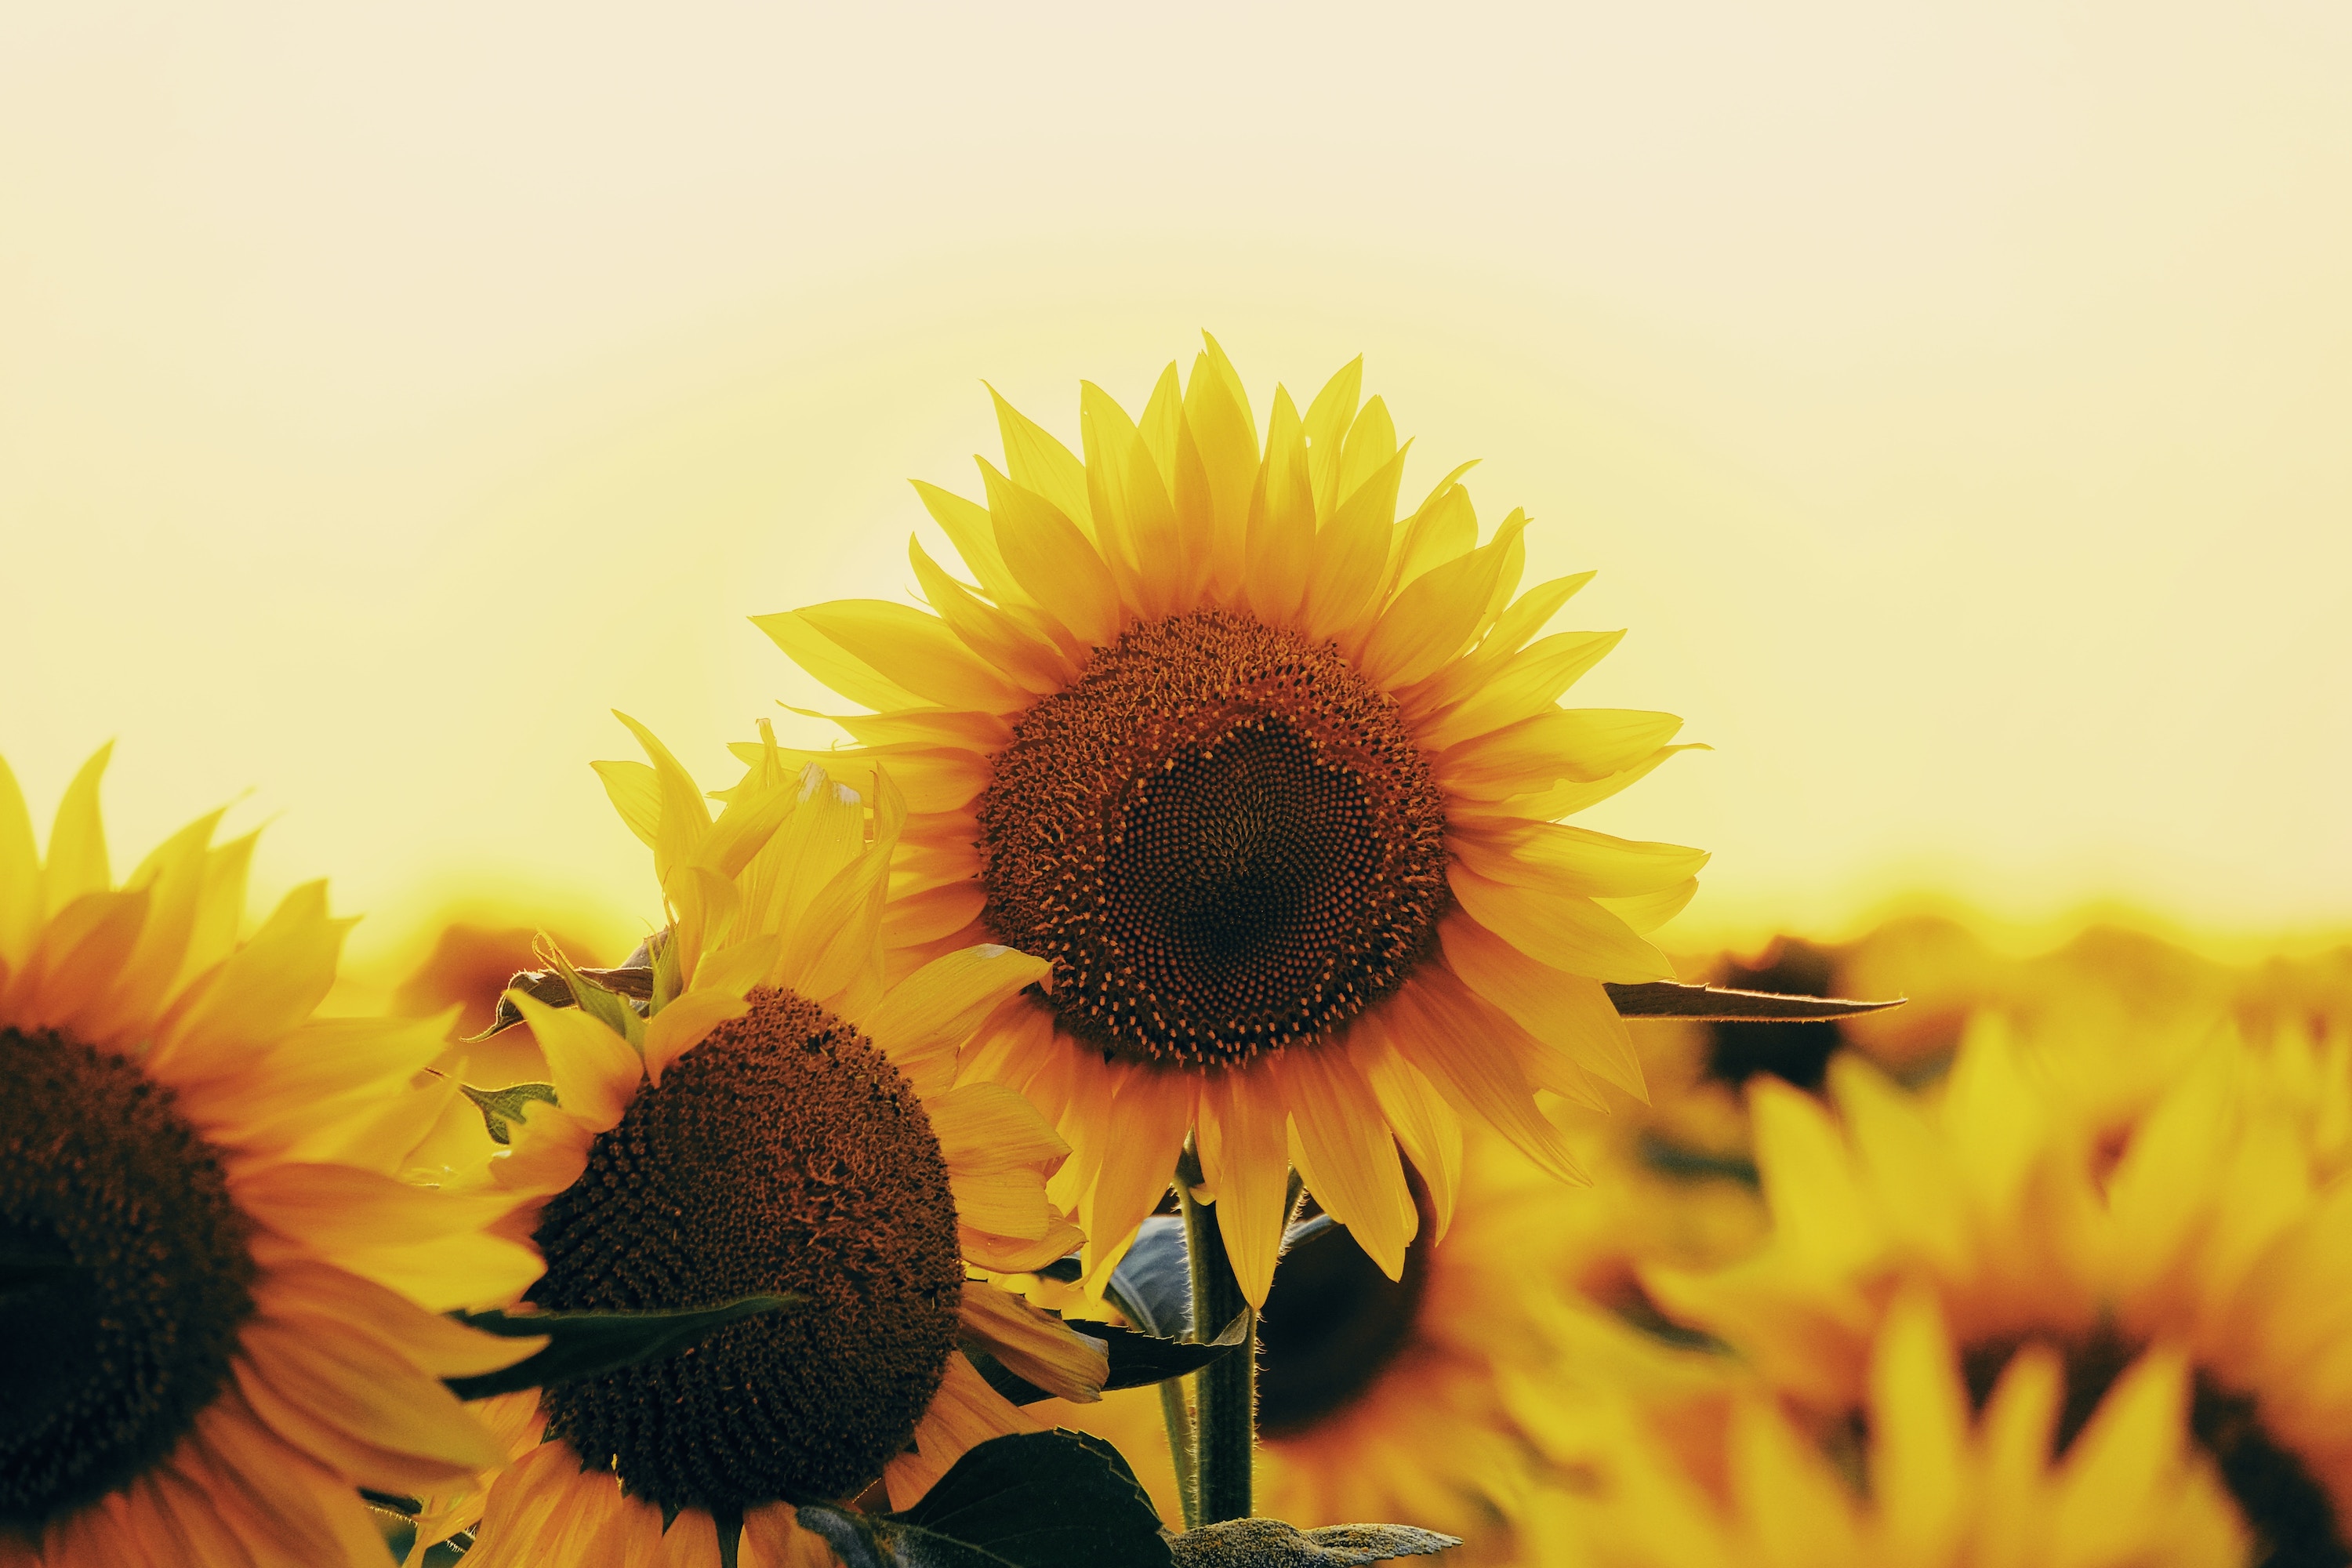 A photo of sunflowers by Roma Kaiuk